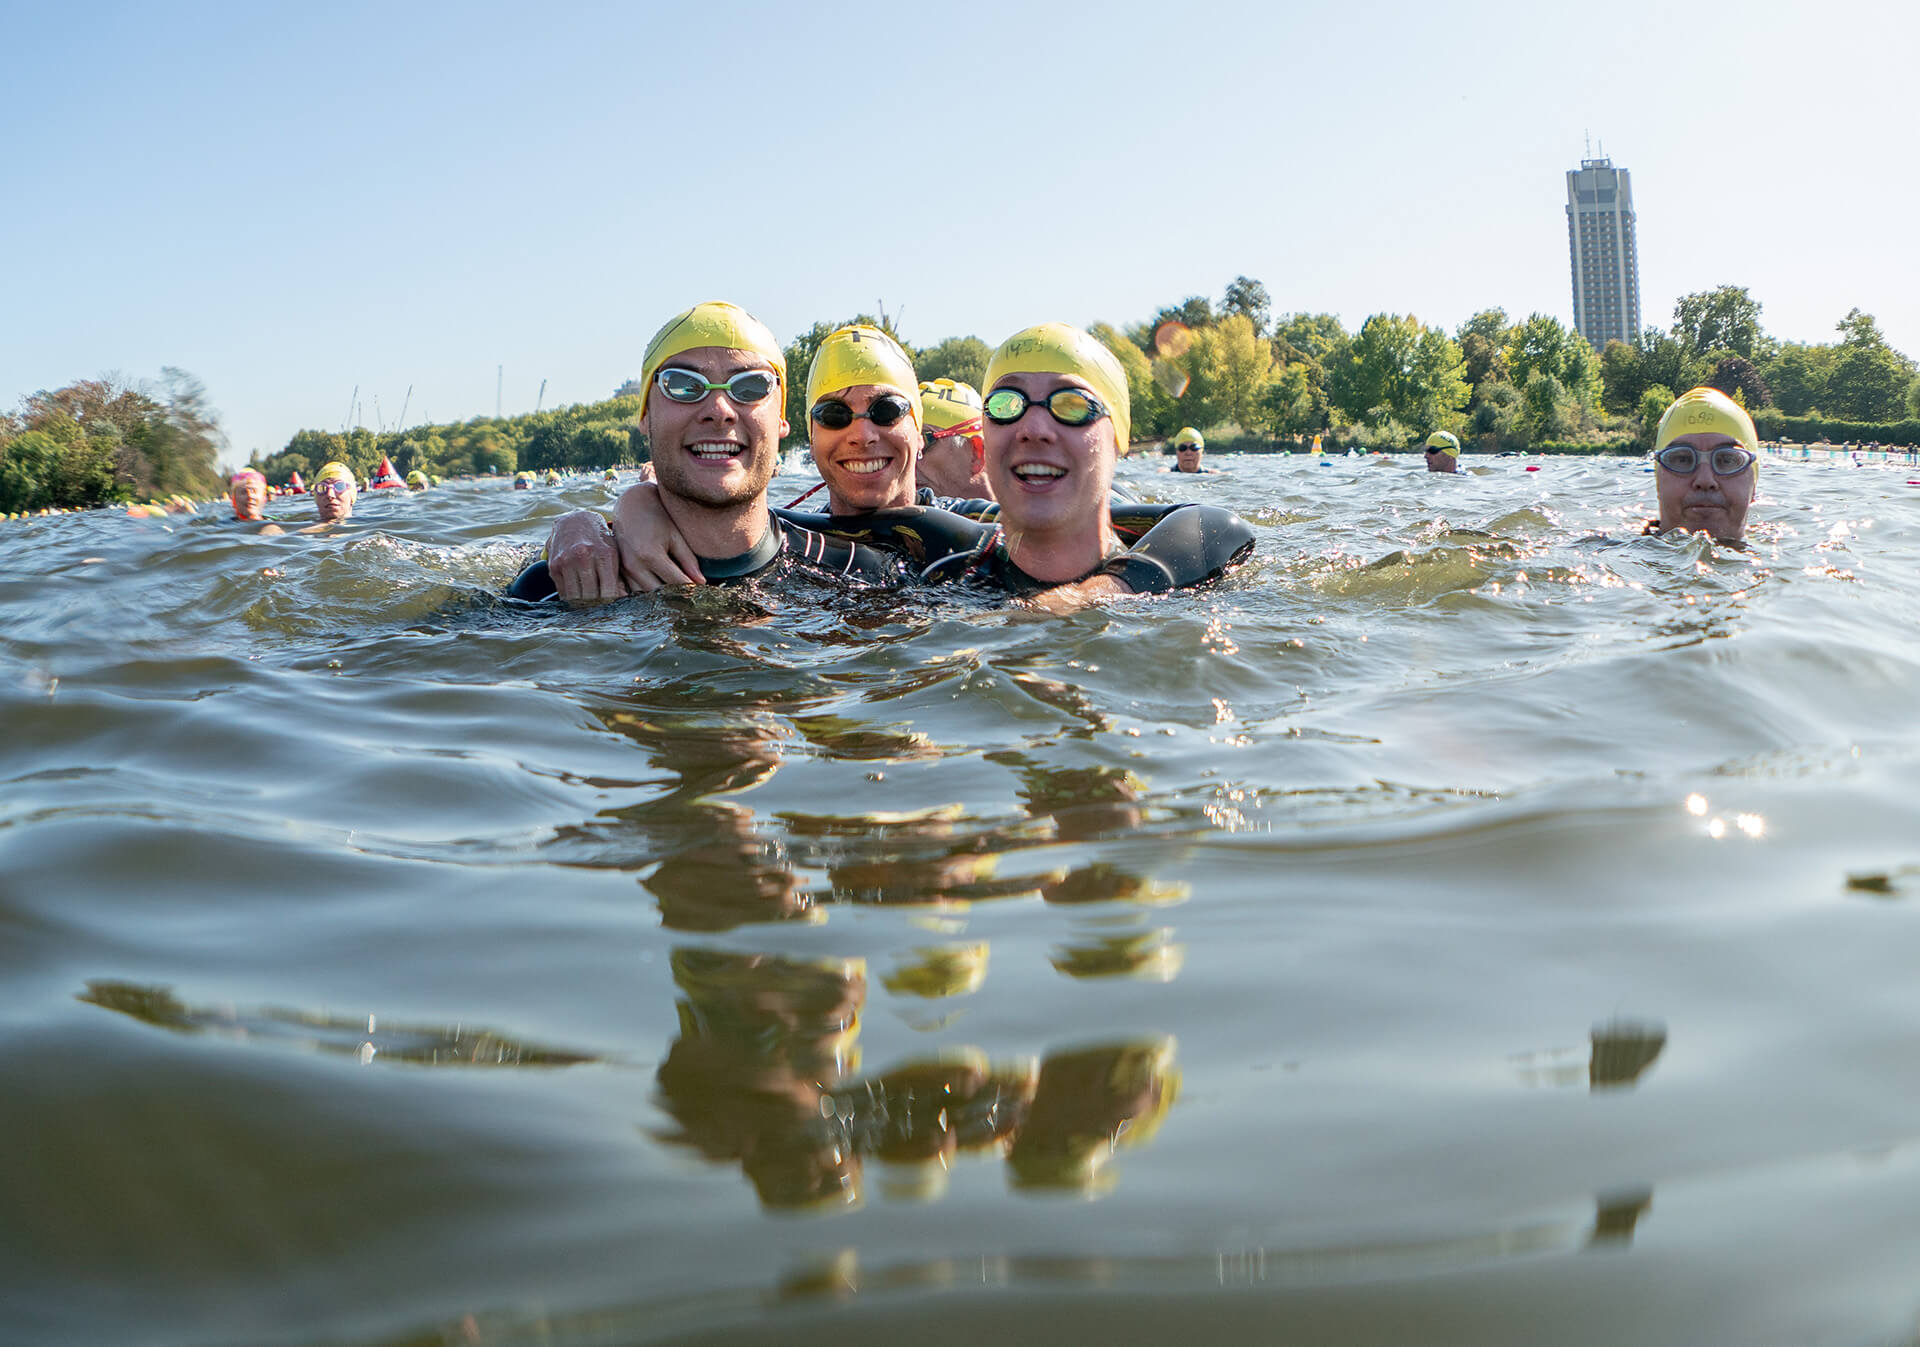 Three swimmers smiling together in the Serpentine lake